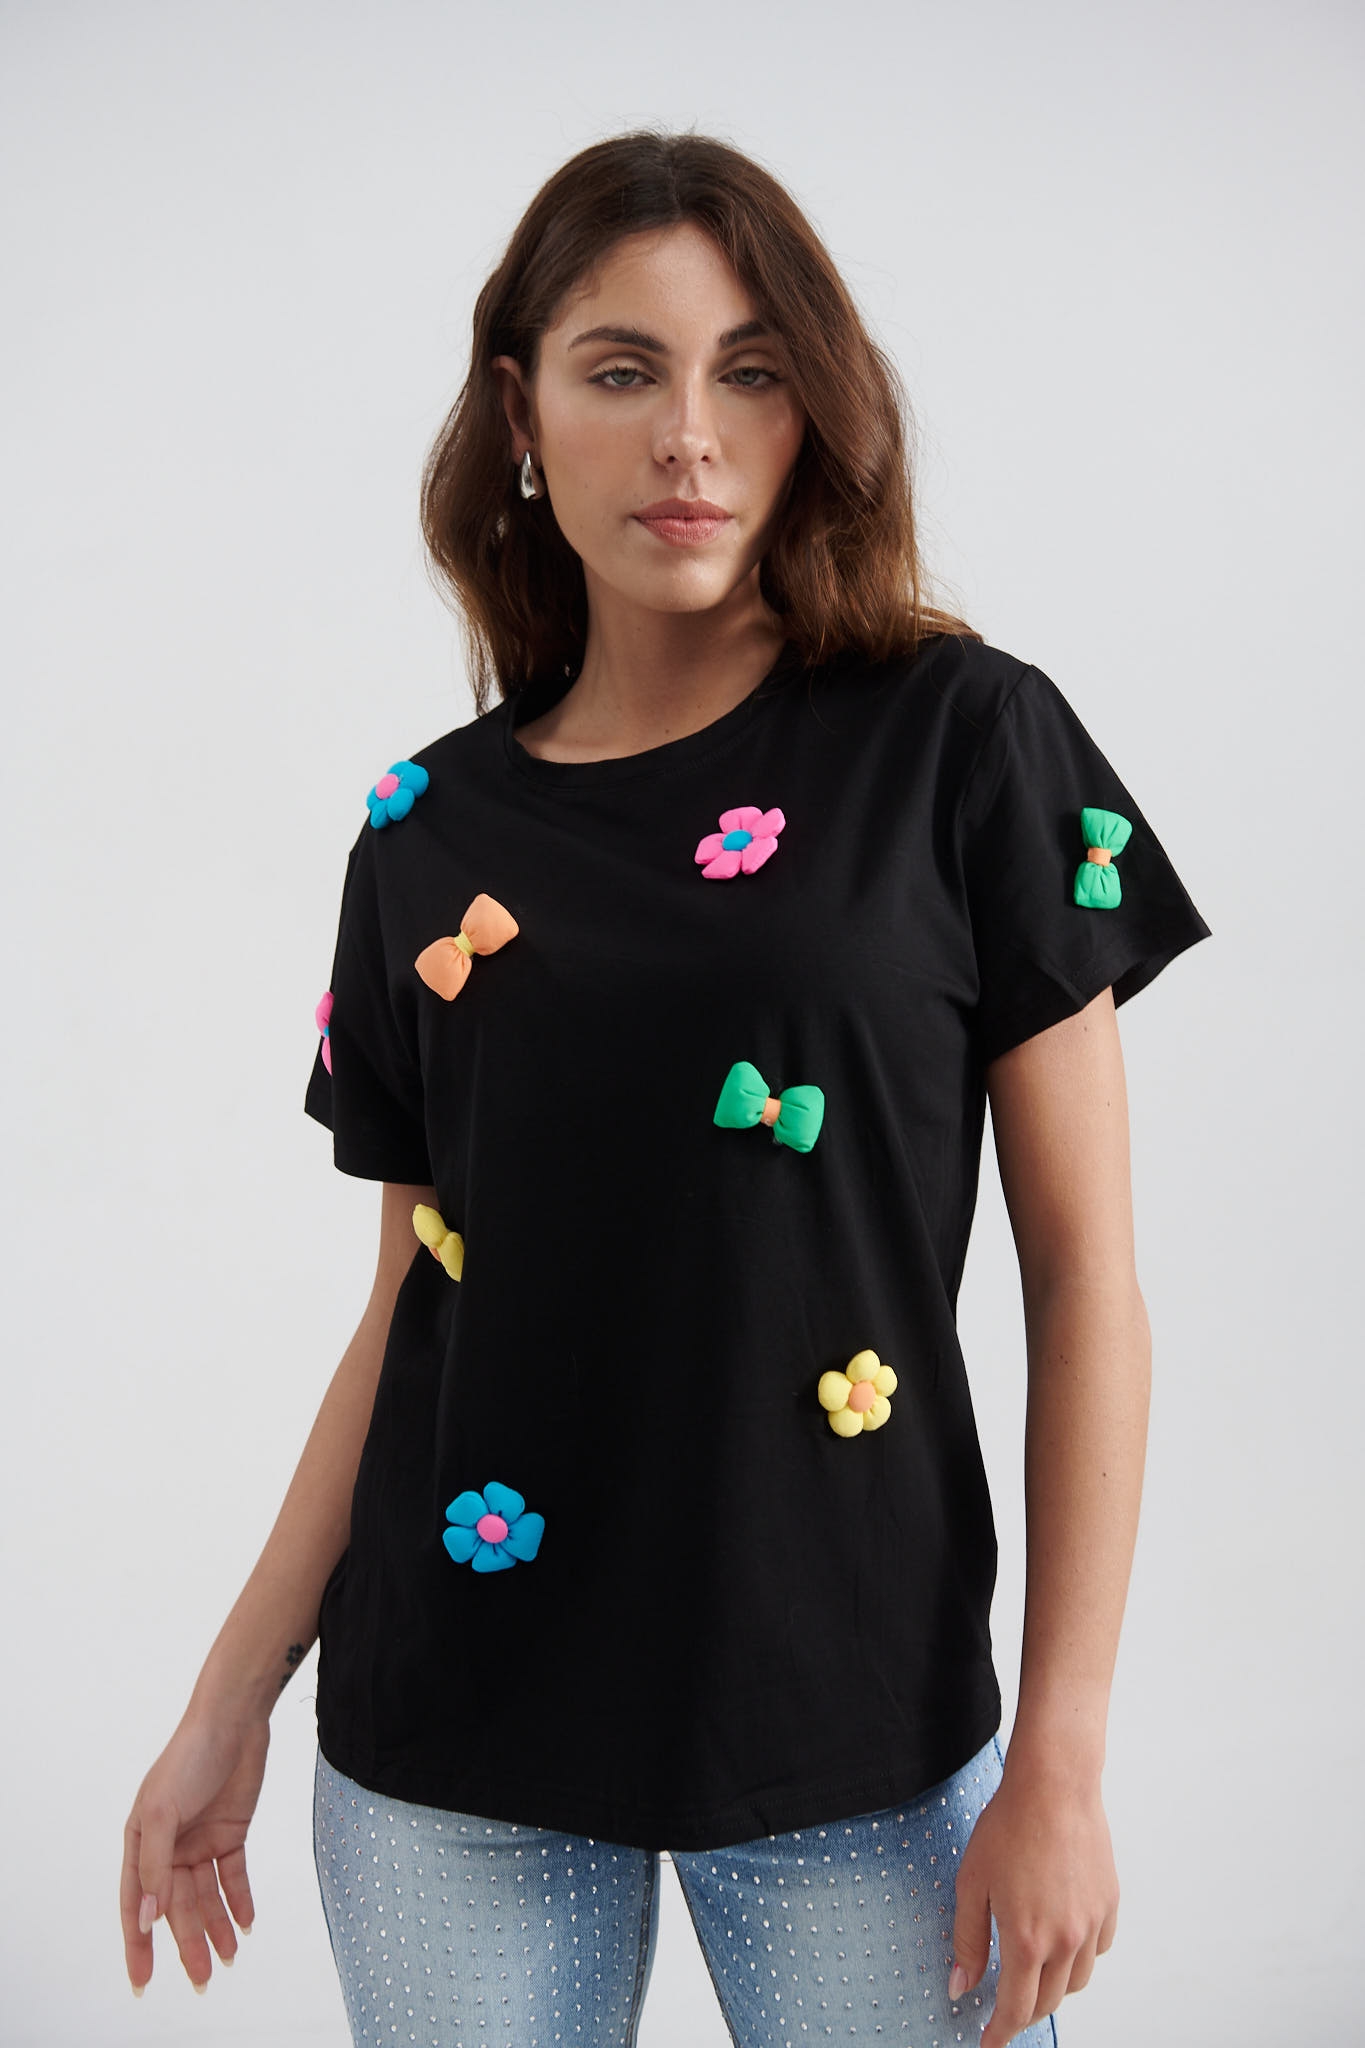 T-Shirt With Colorful 3D Elements